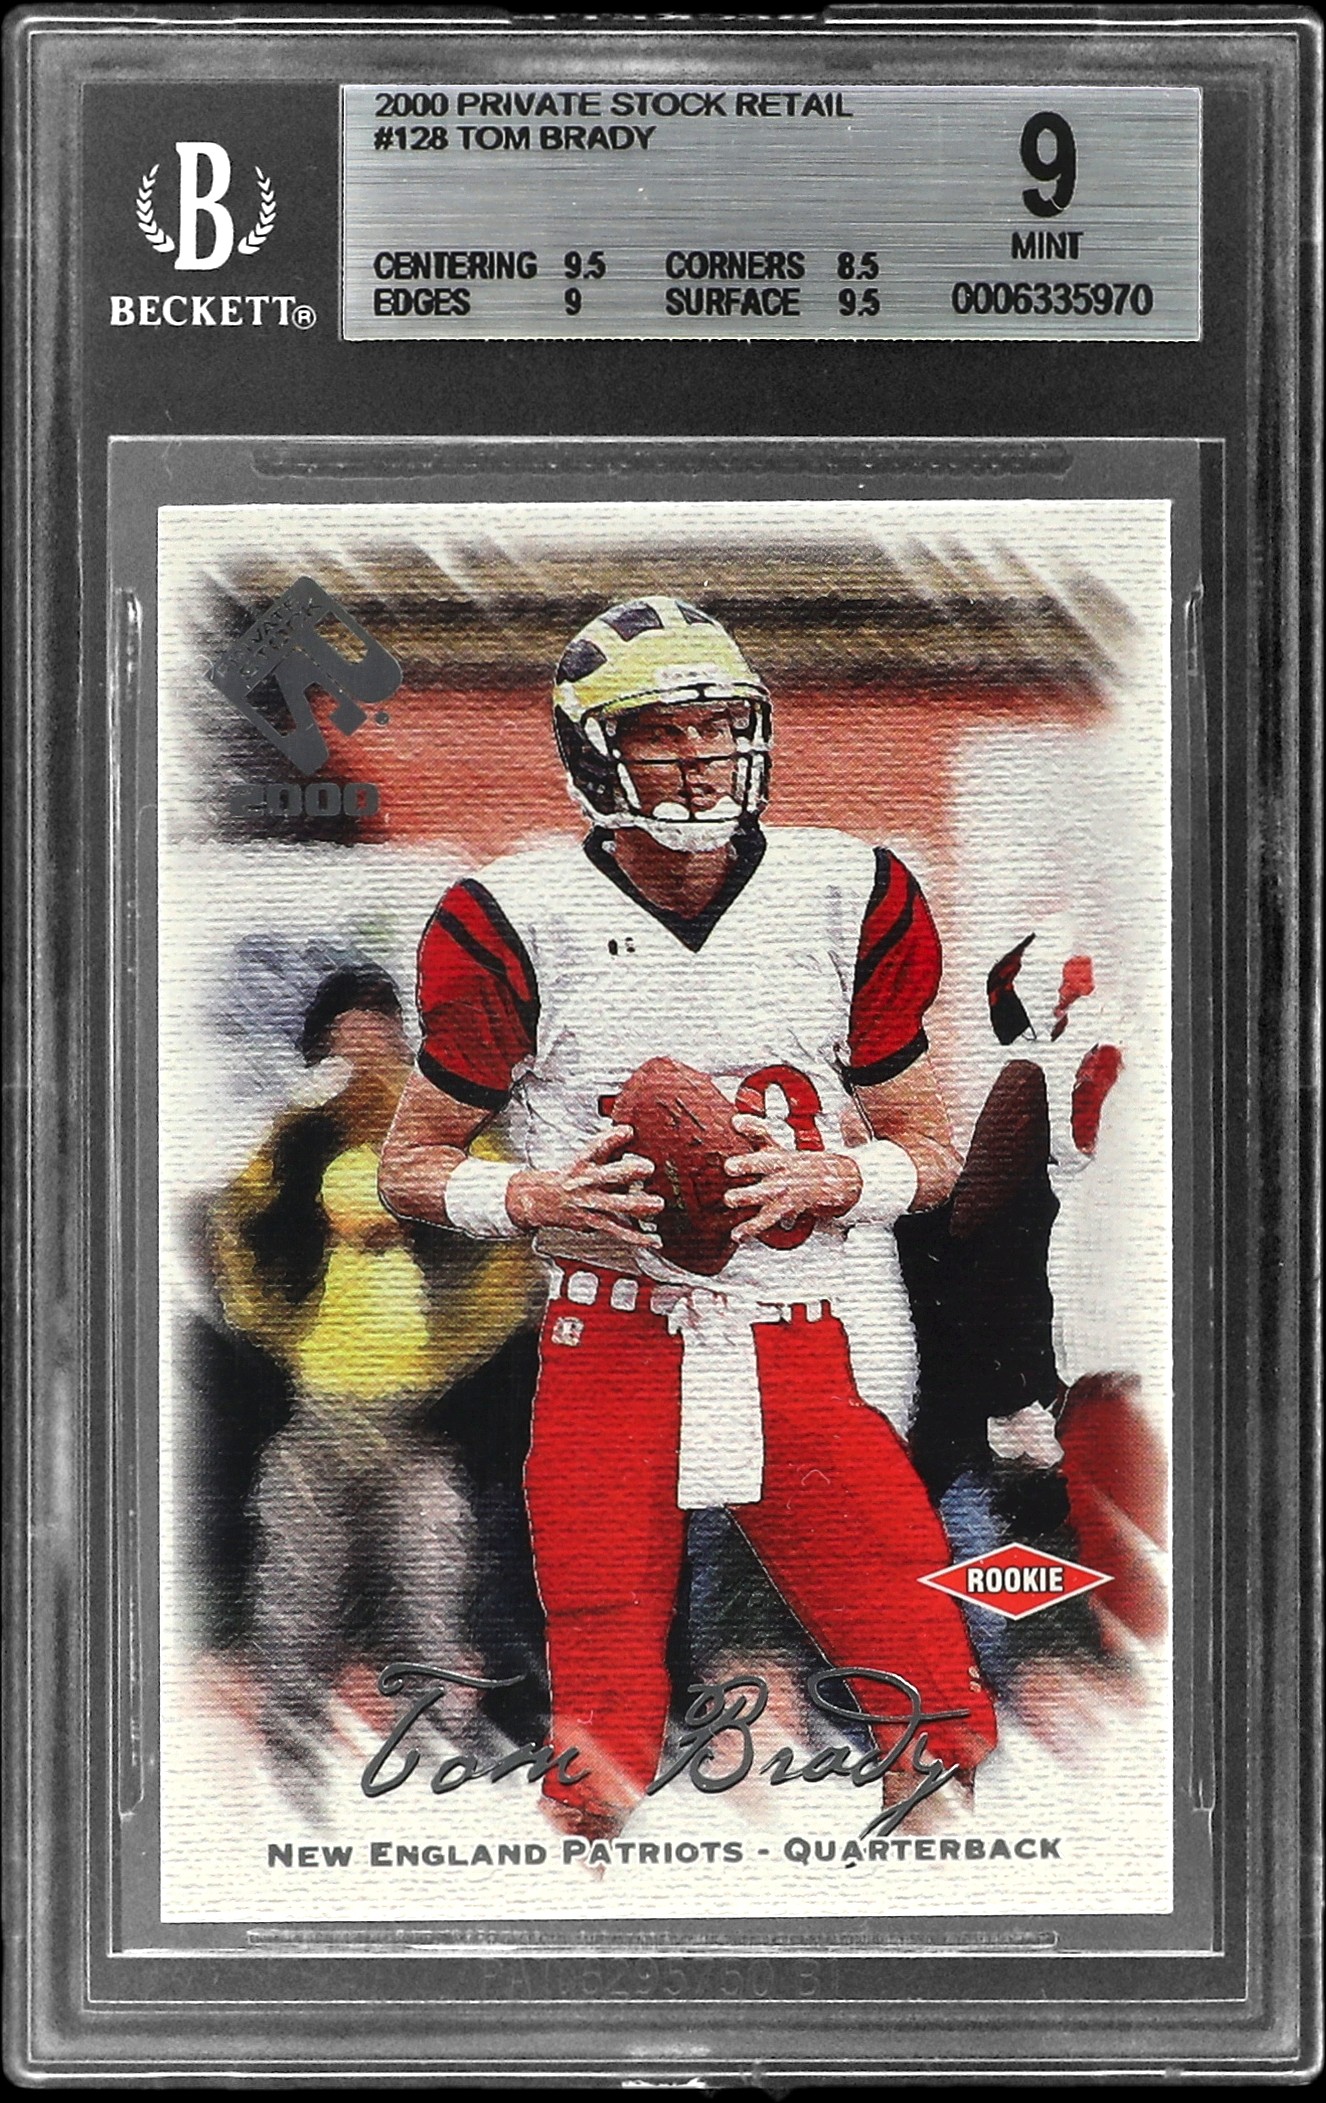 2000 Pacific Private Stock Retail #128 Tom Brady Rookie Card (#046/650) - BGS MINT 9